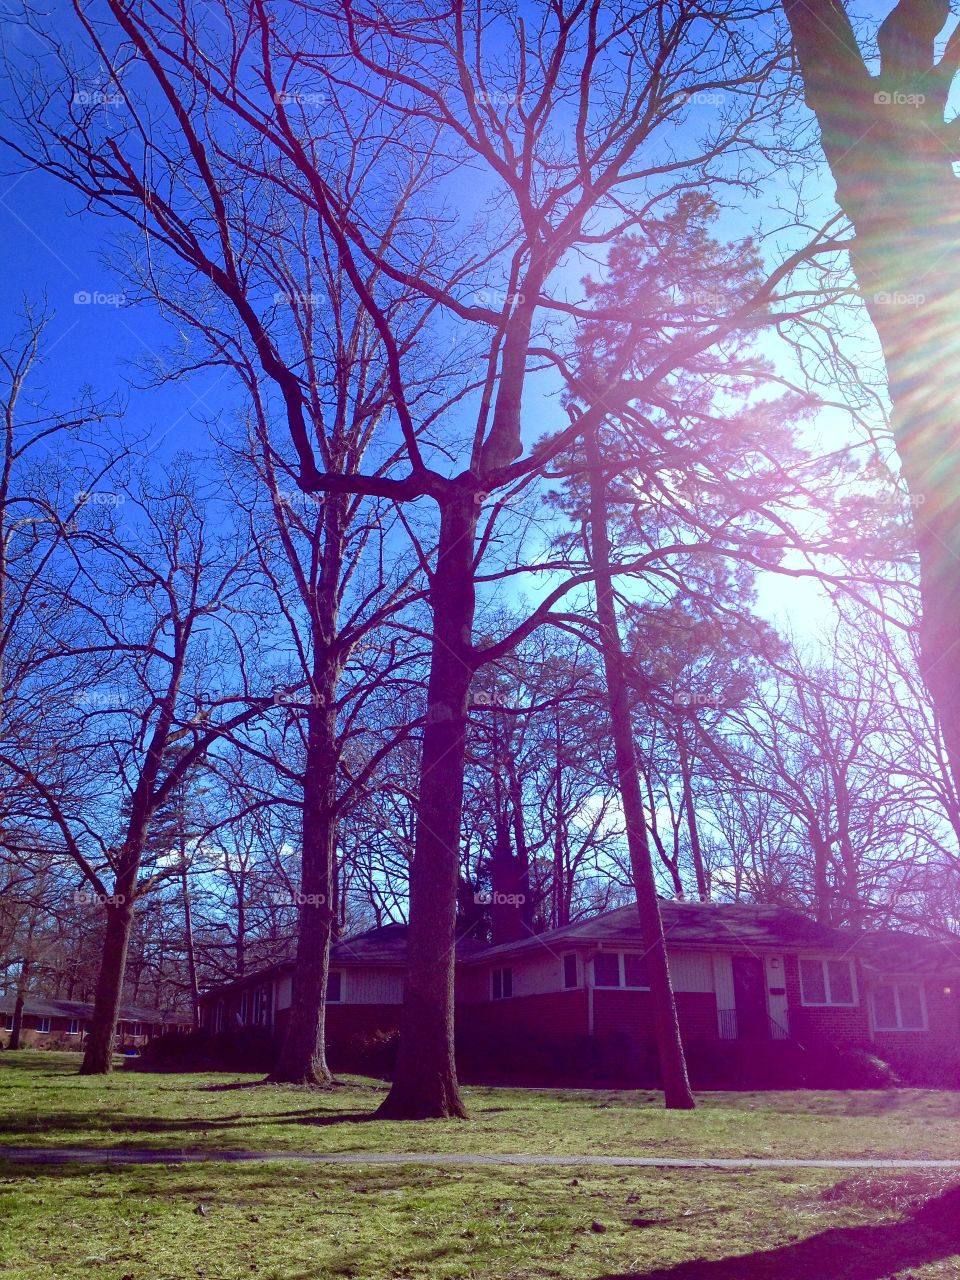 Blue Sky High Tree. Tree rise and blue sky with ray of light in Chapel Hill...